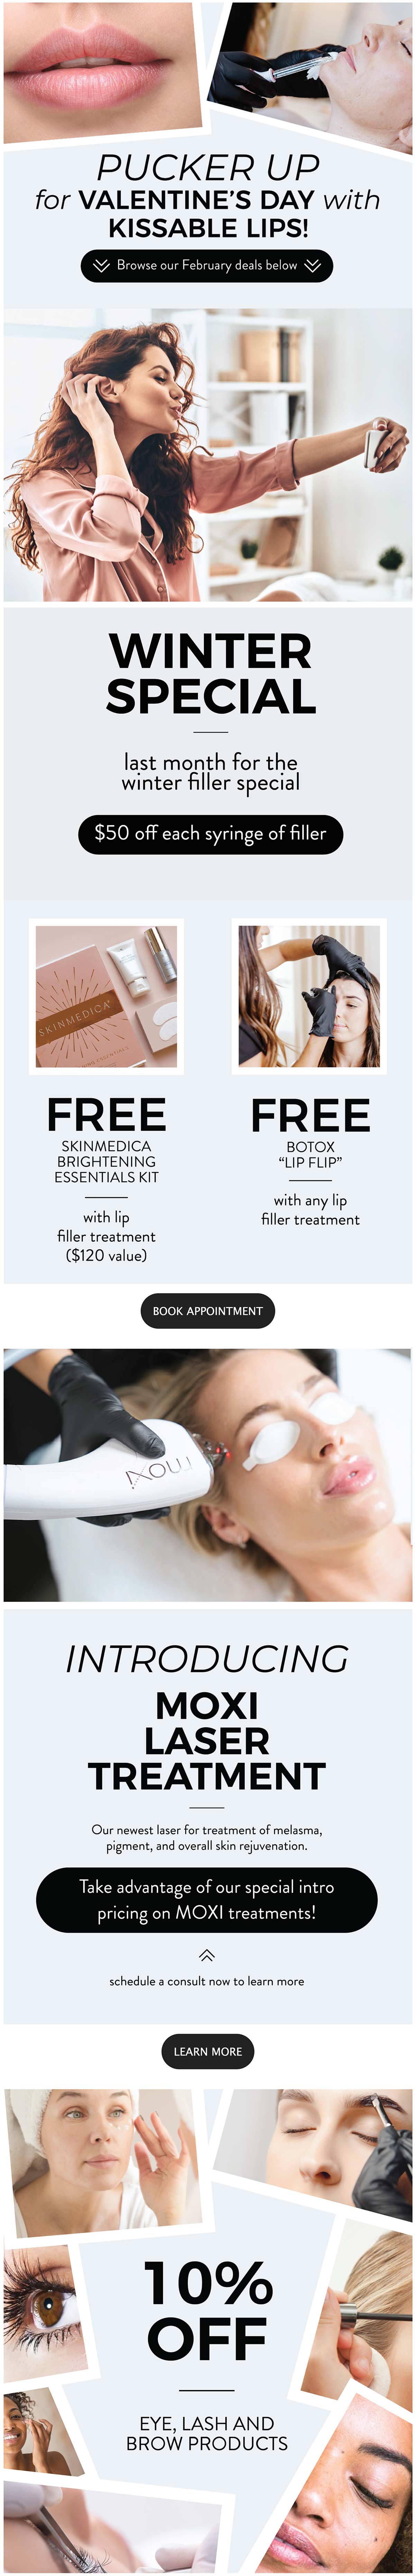 Glow Dermspa February Deals - Specials on Lip Filler and More